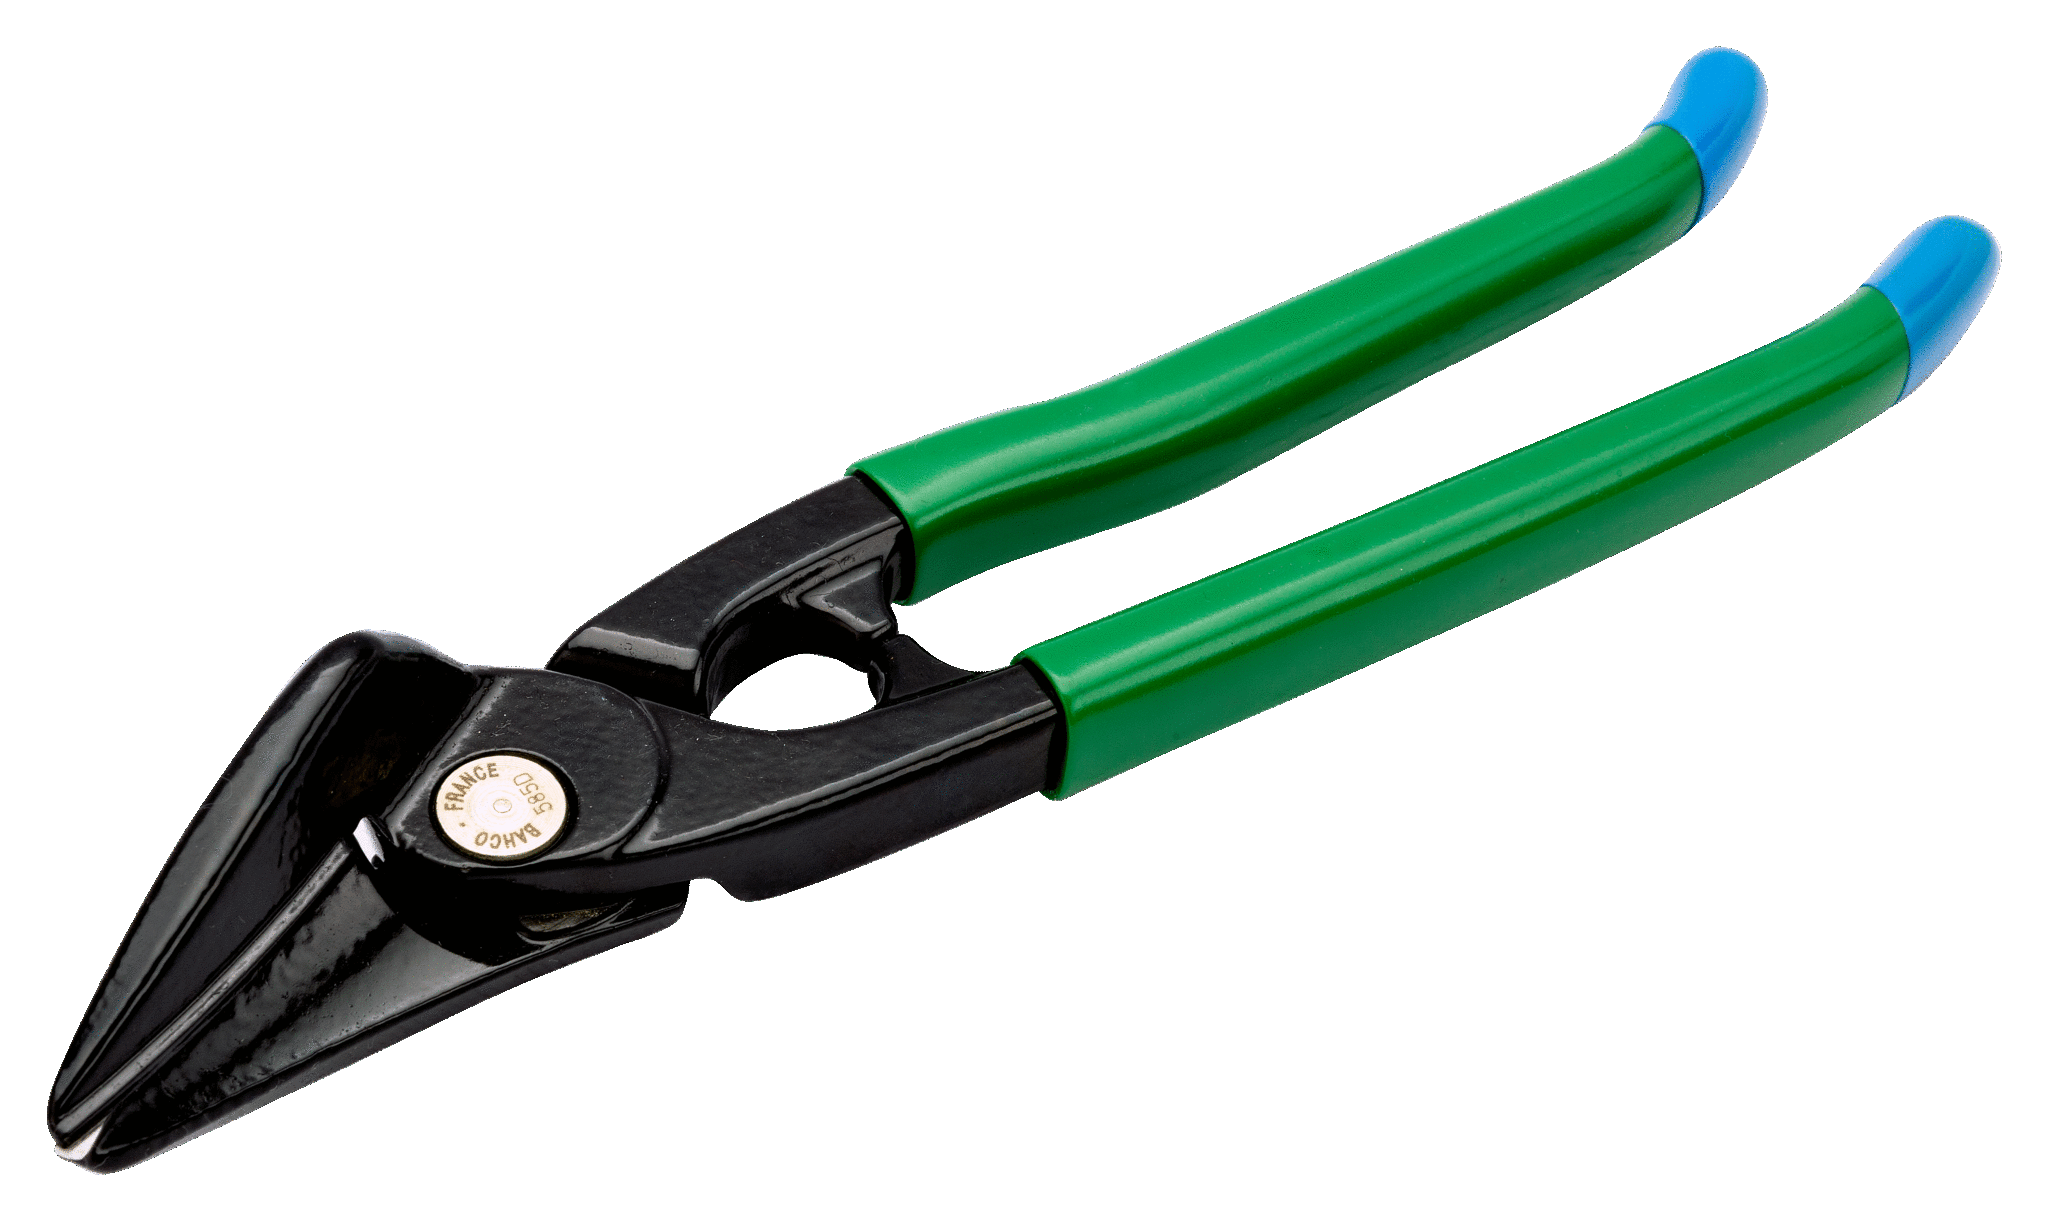 Right and Straight Cut Offset Pass-Through Metal Shears for Soft